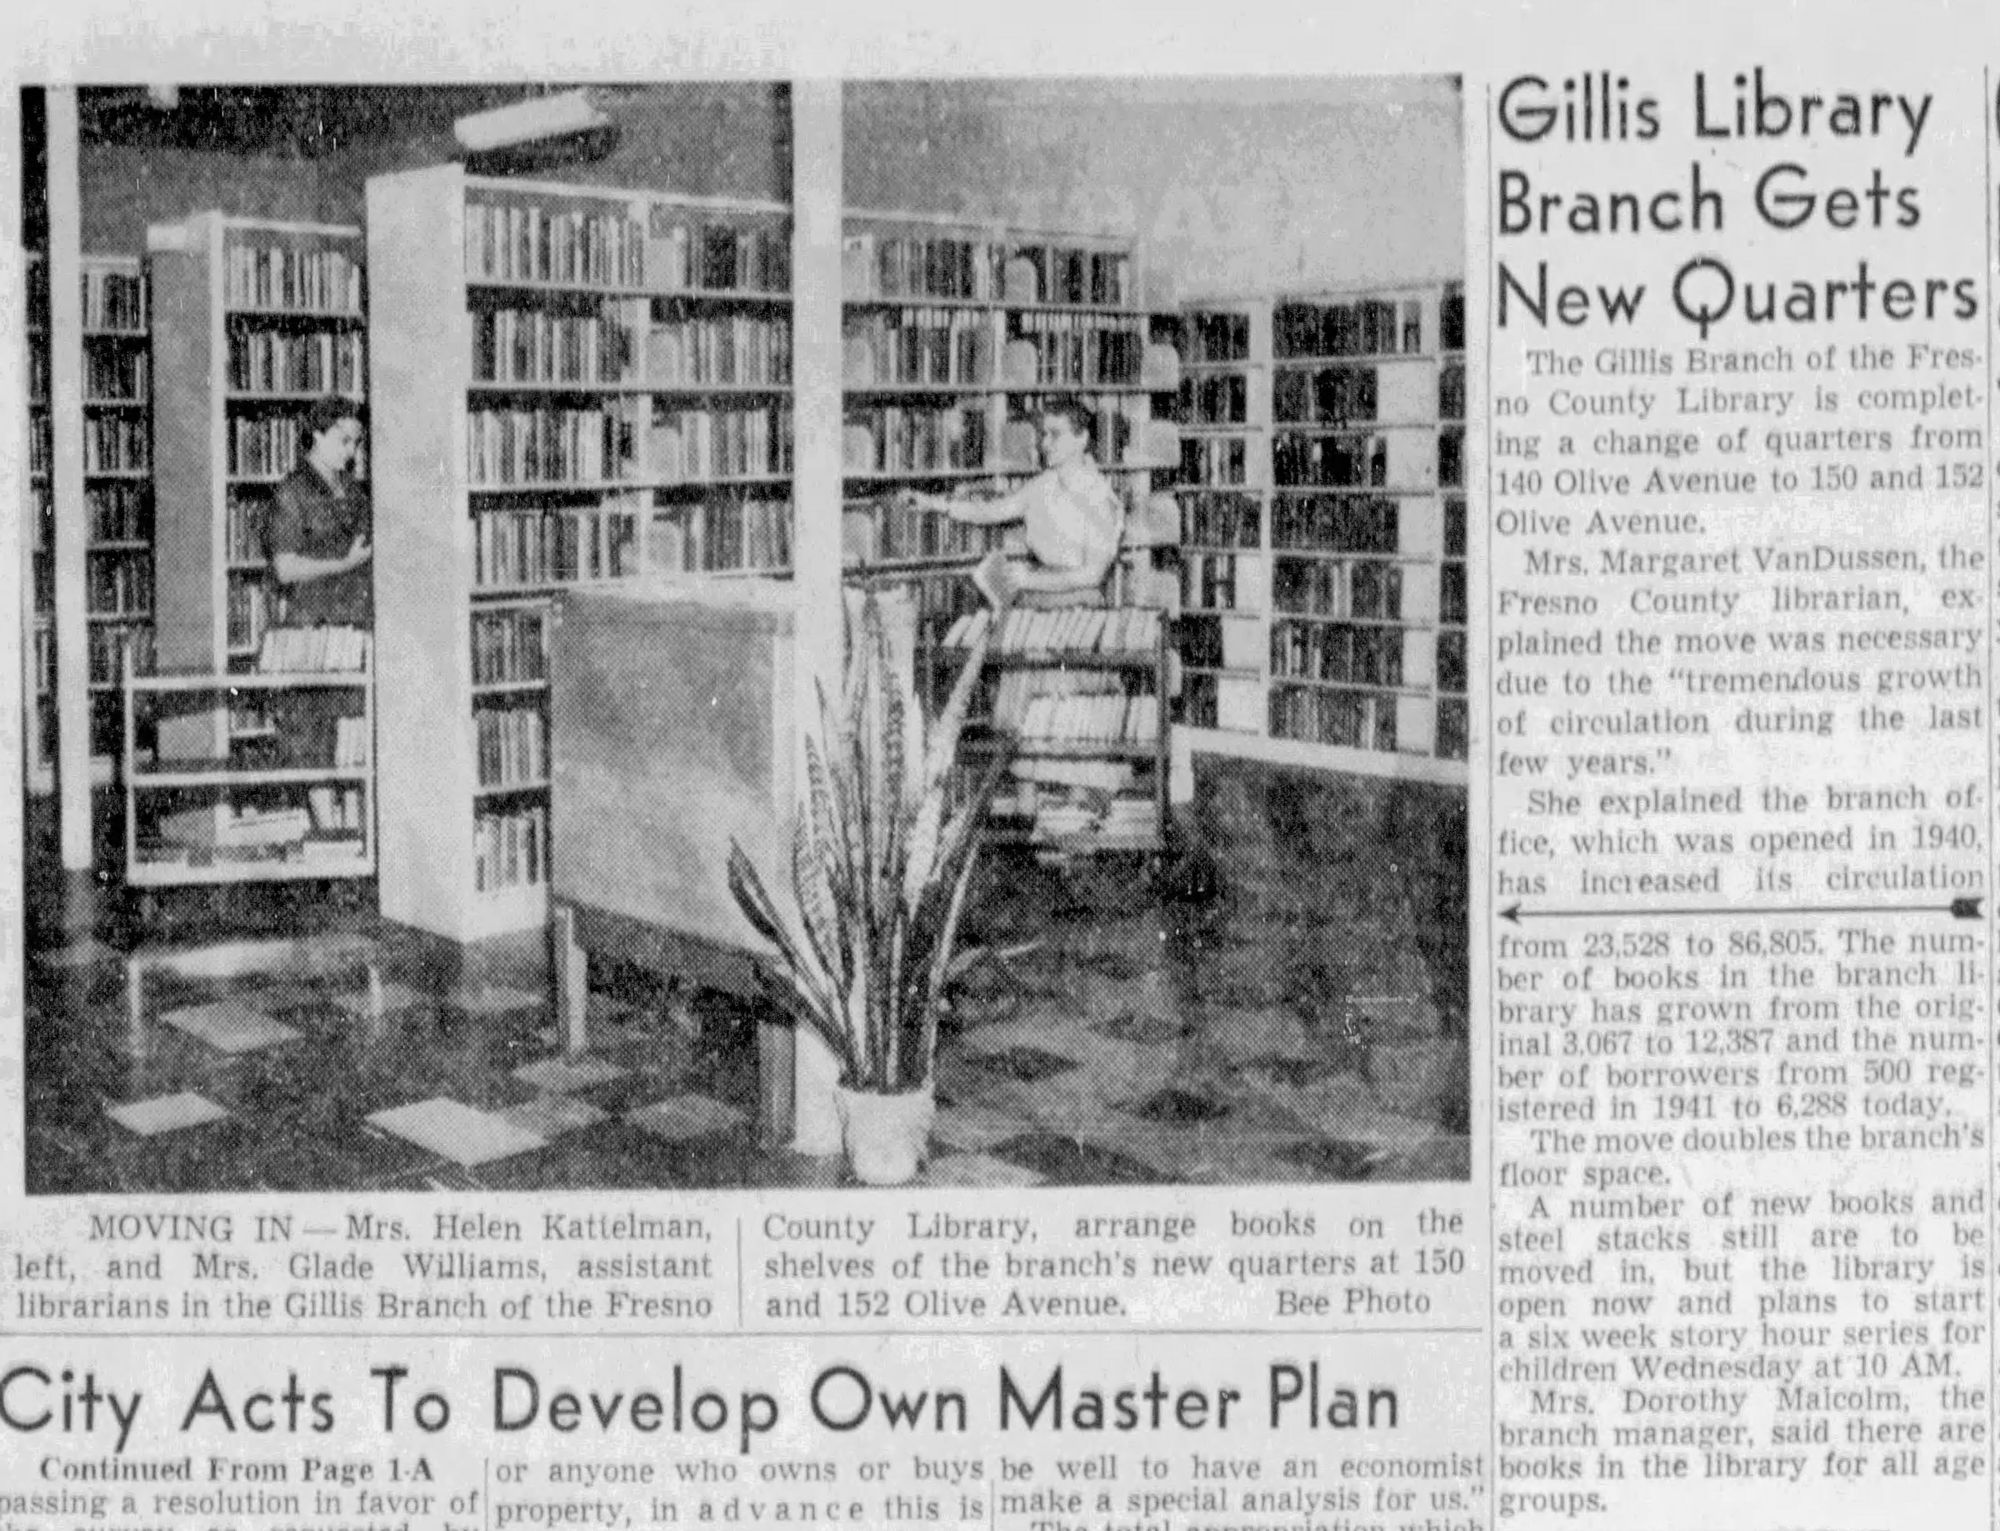 Grassroots Effort To Bring a Library Back to the Tower District